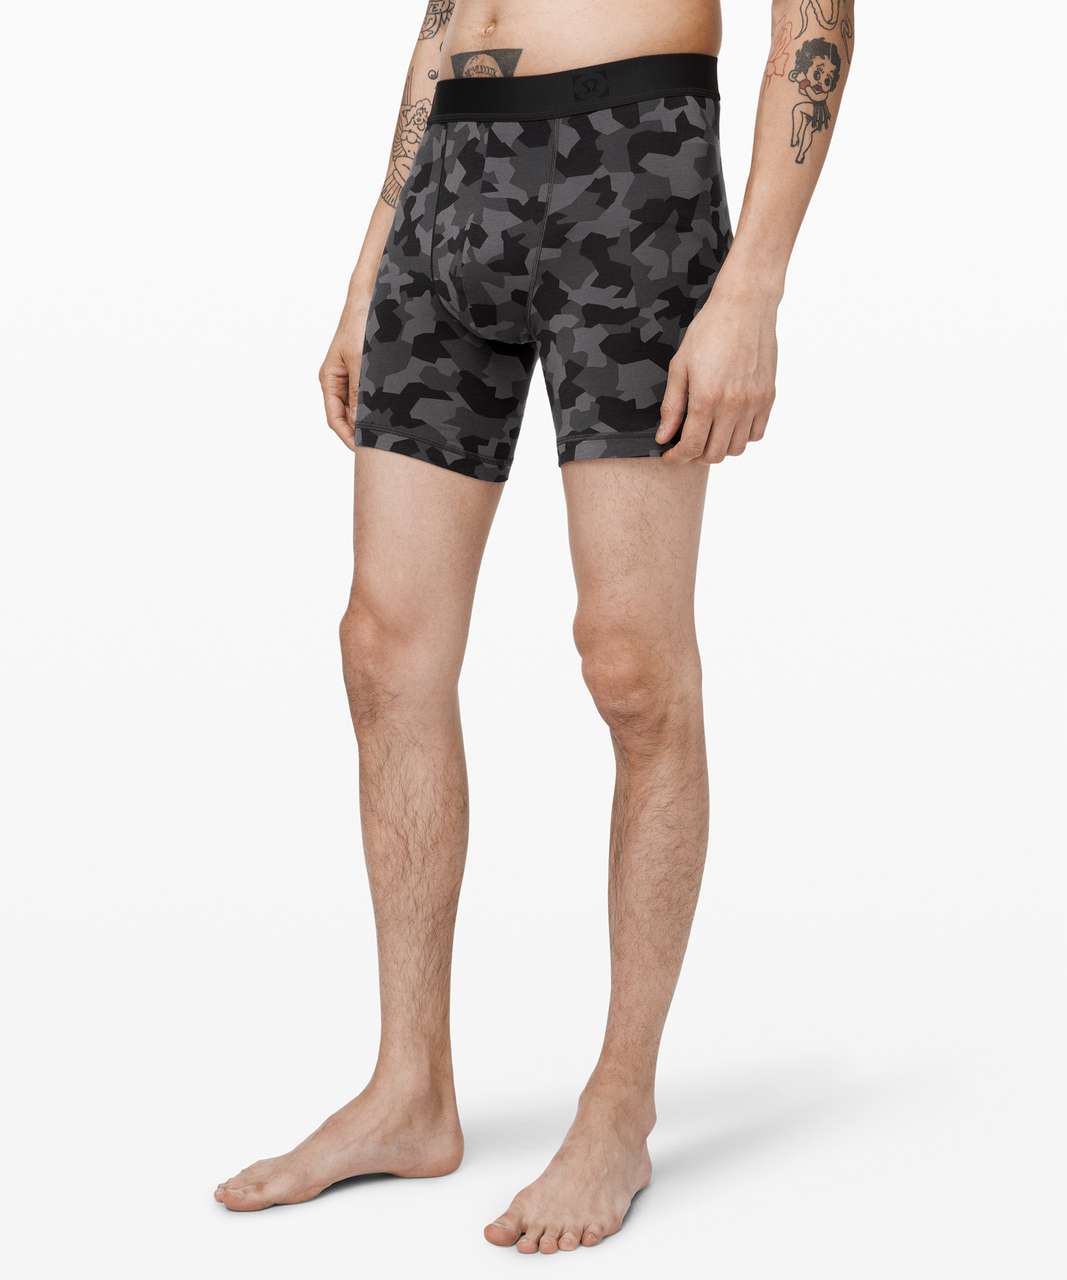 Lululemon Always In Motion Boxer *The Long One 7" - Geo Camo Micro Coal Obsidian (First Release)